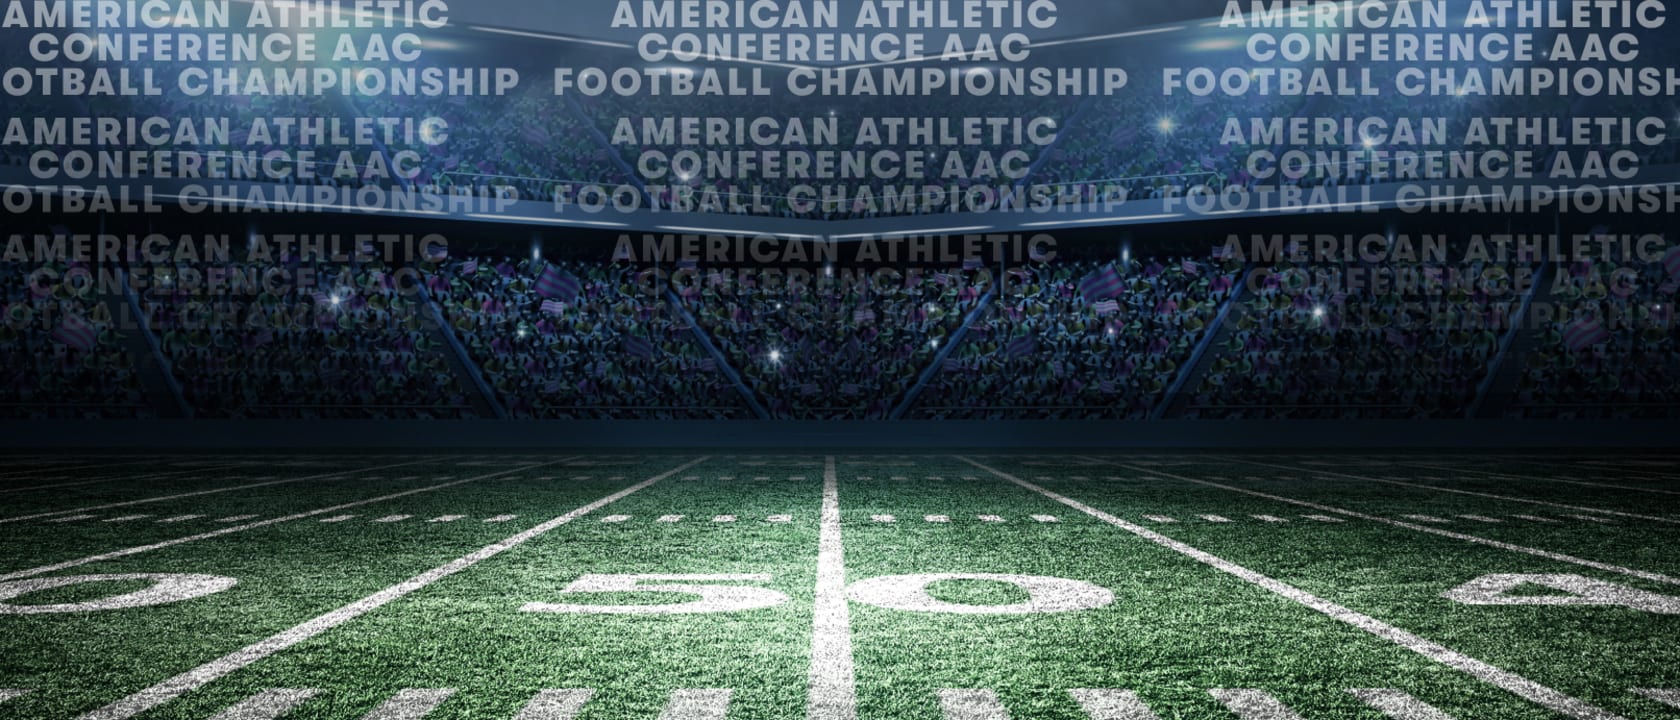 American Athletic Conference AAC Football Championship